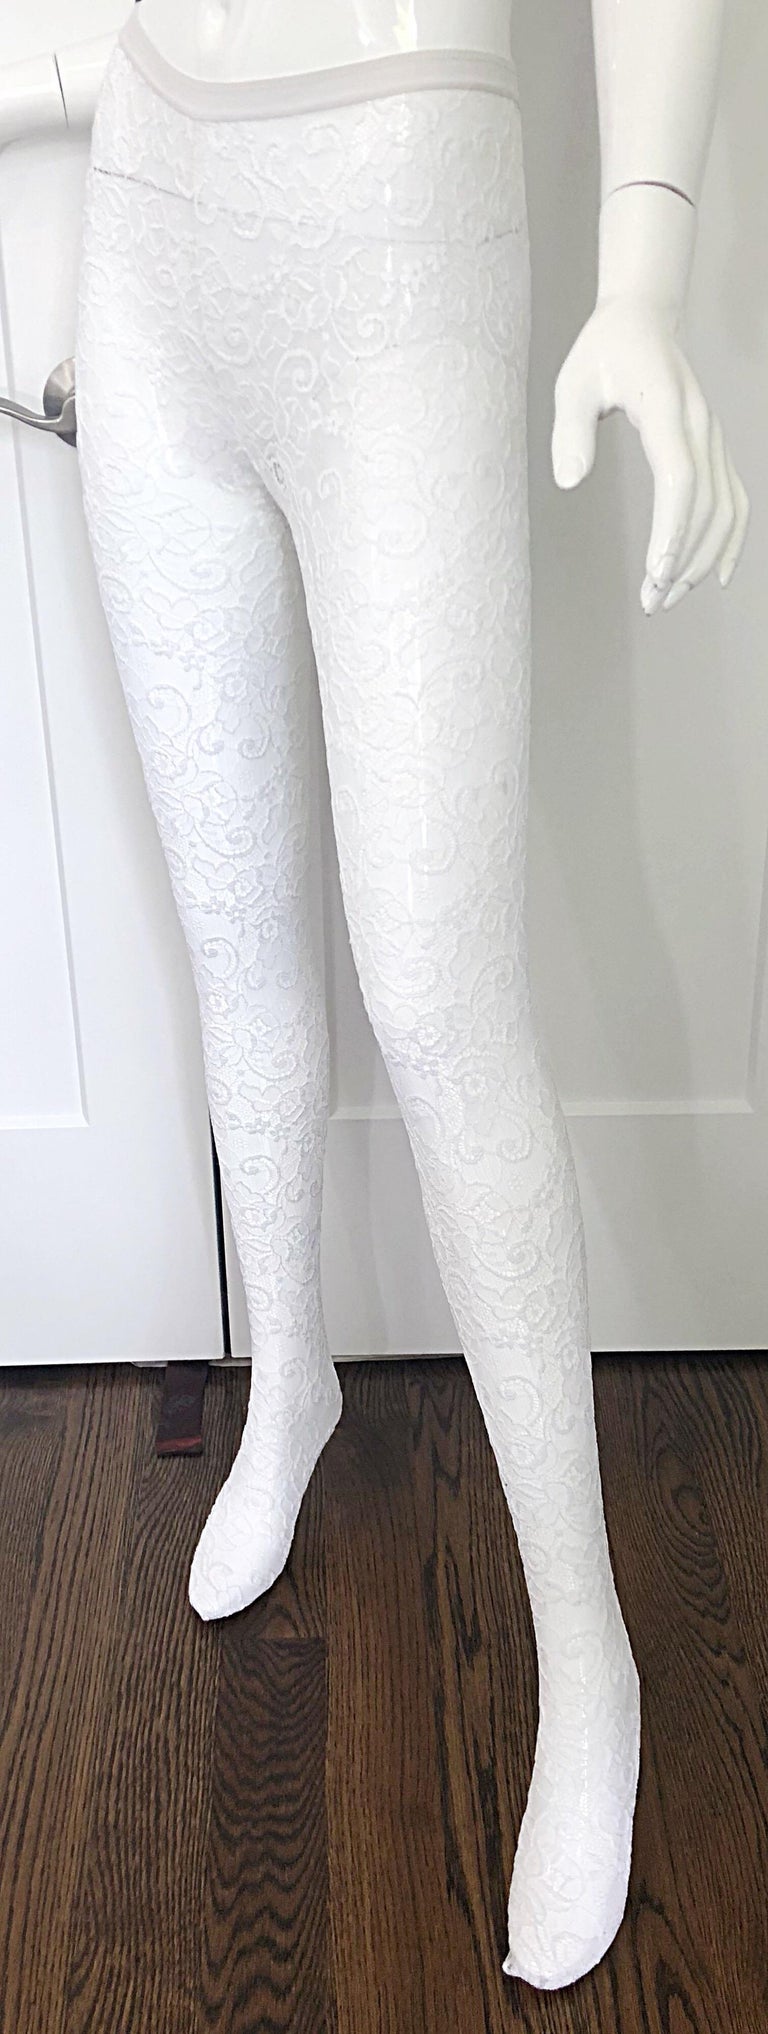 Never Worn Gianni Versace 1990s White Lace Vintage Panty Hose Leggings  Stockings For Sale at 1stDibs | versace stocking, versace tights lace,  white versace leggings